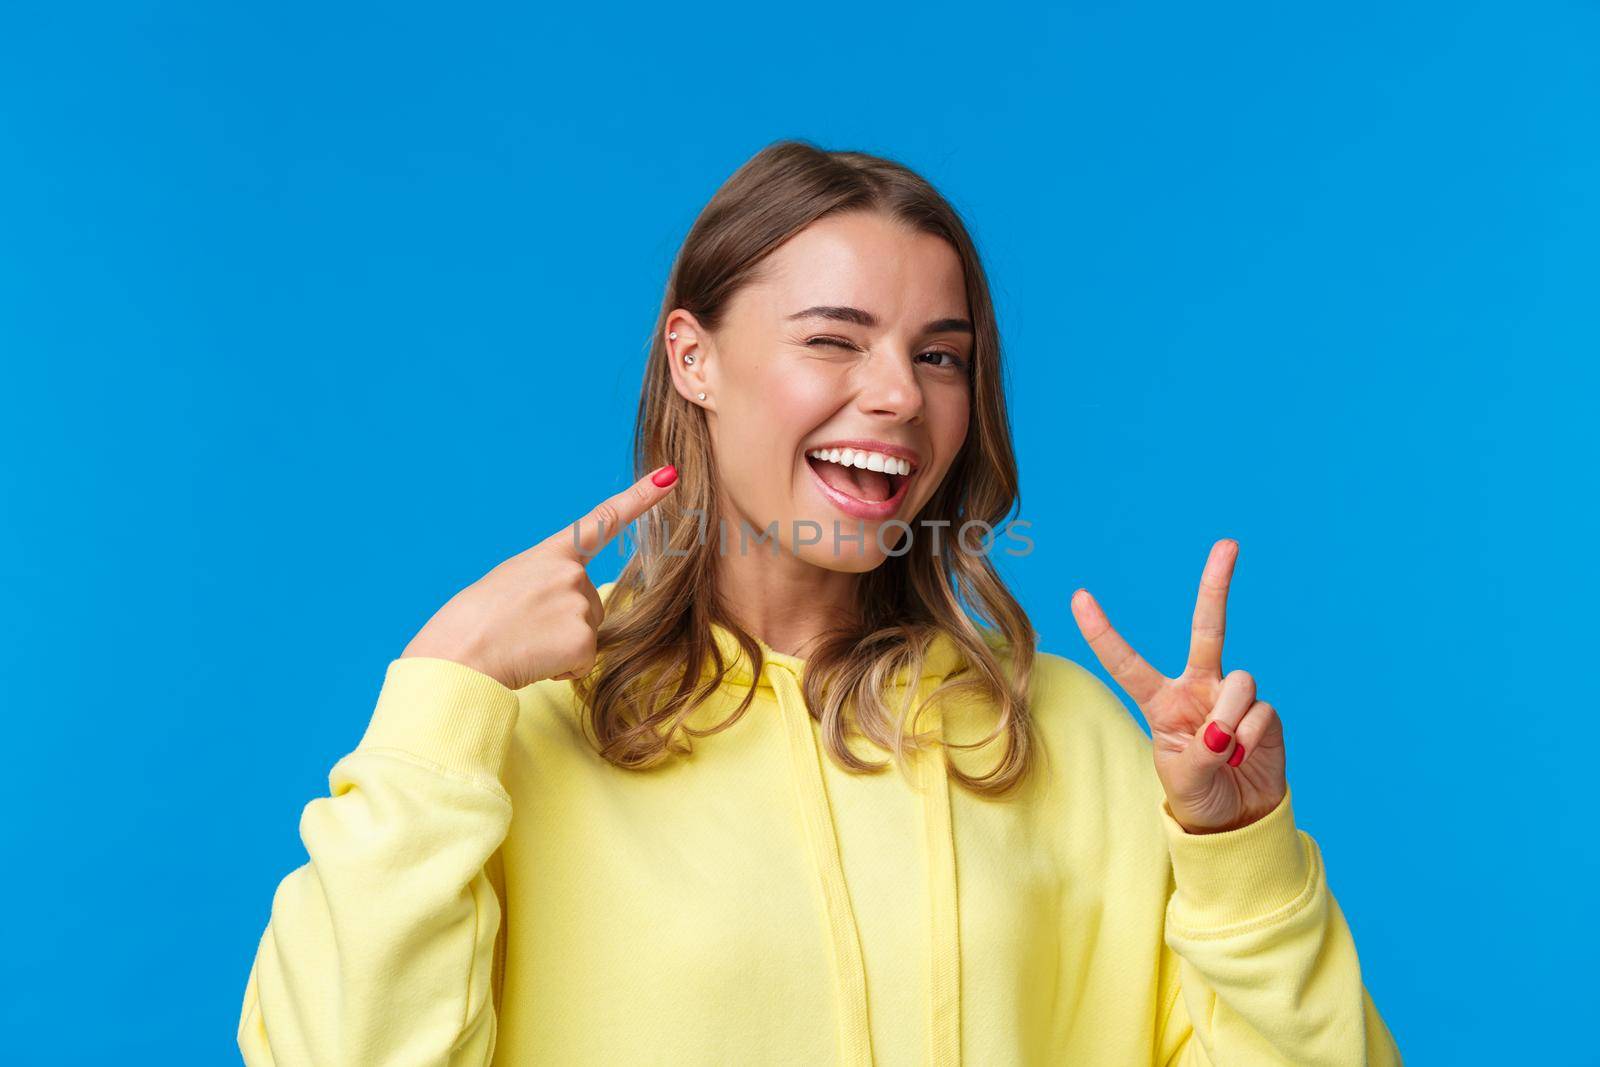 Close-up portrait of proud and boastful cute blond girl with short hair and pierced ear, pointing at herself and make peace gesture with pleased smile, standing blue background upbeat.